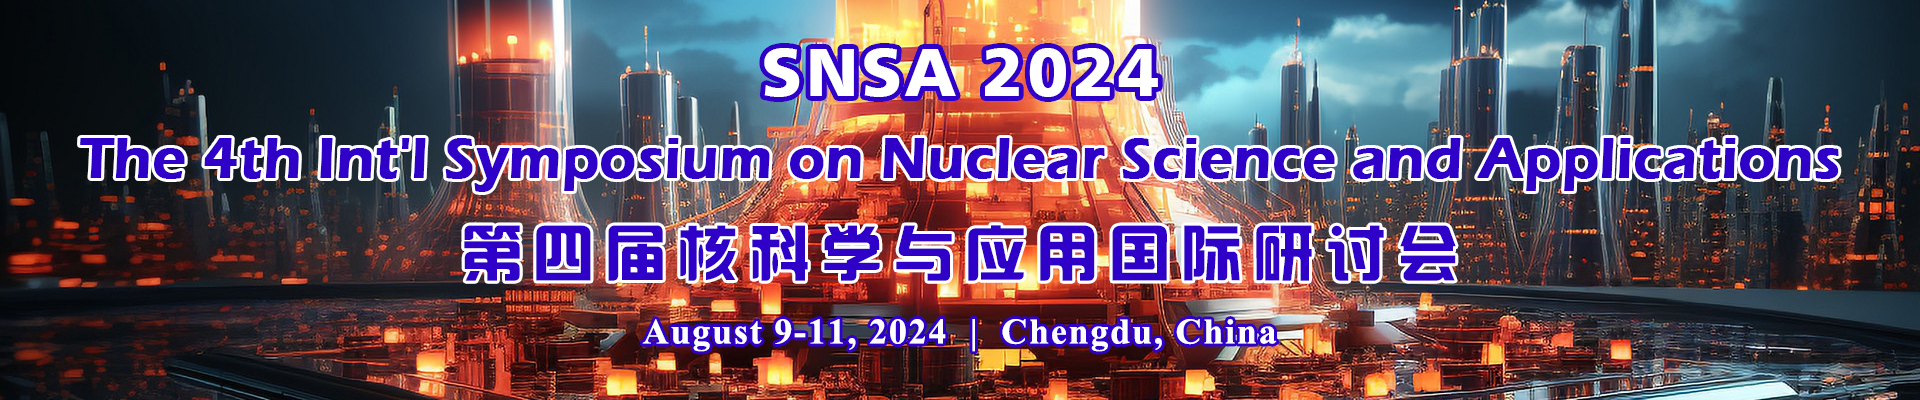 The 4th Int'l Symposium on Nuclear Science and Applications (SNSA 2024), Chengdu, Sichuan, China